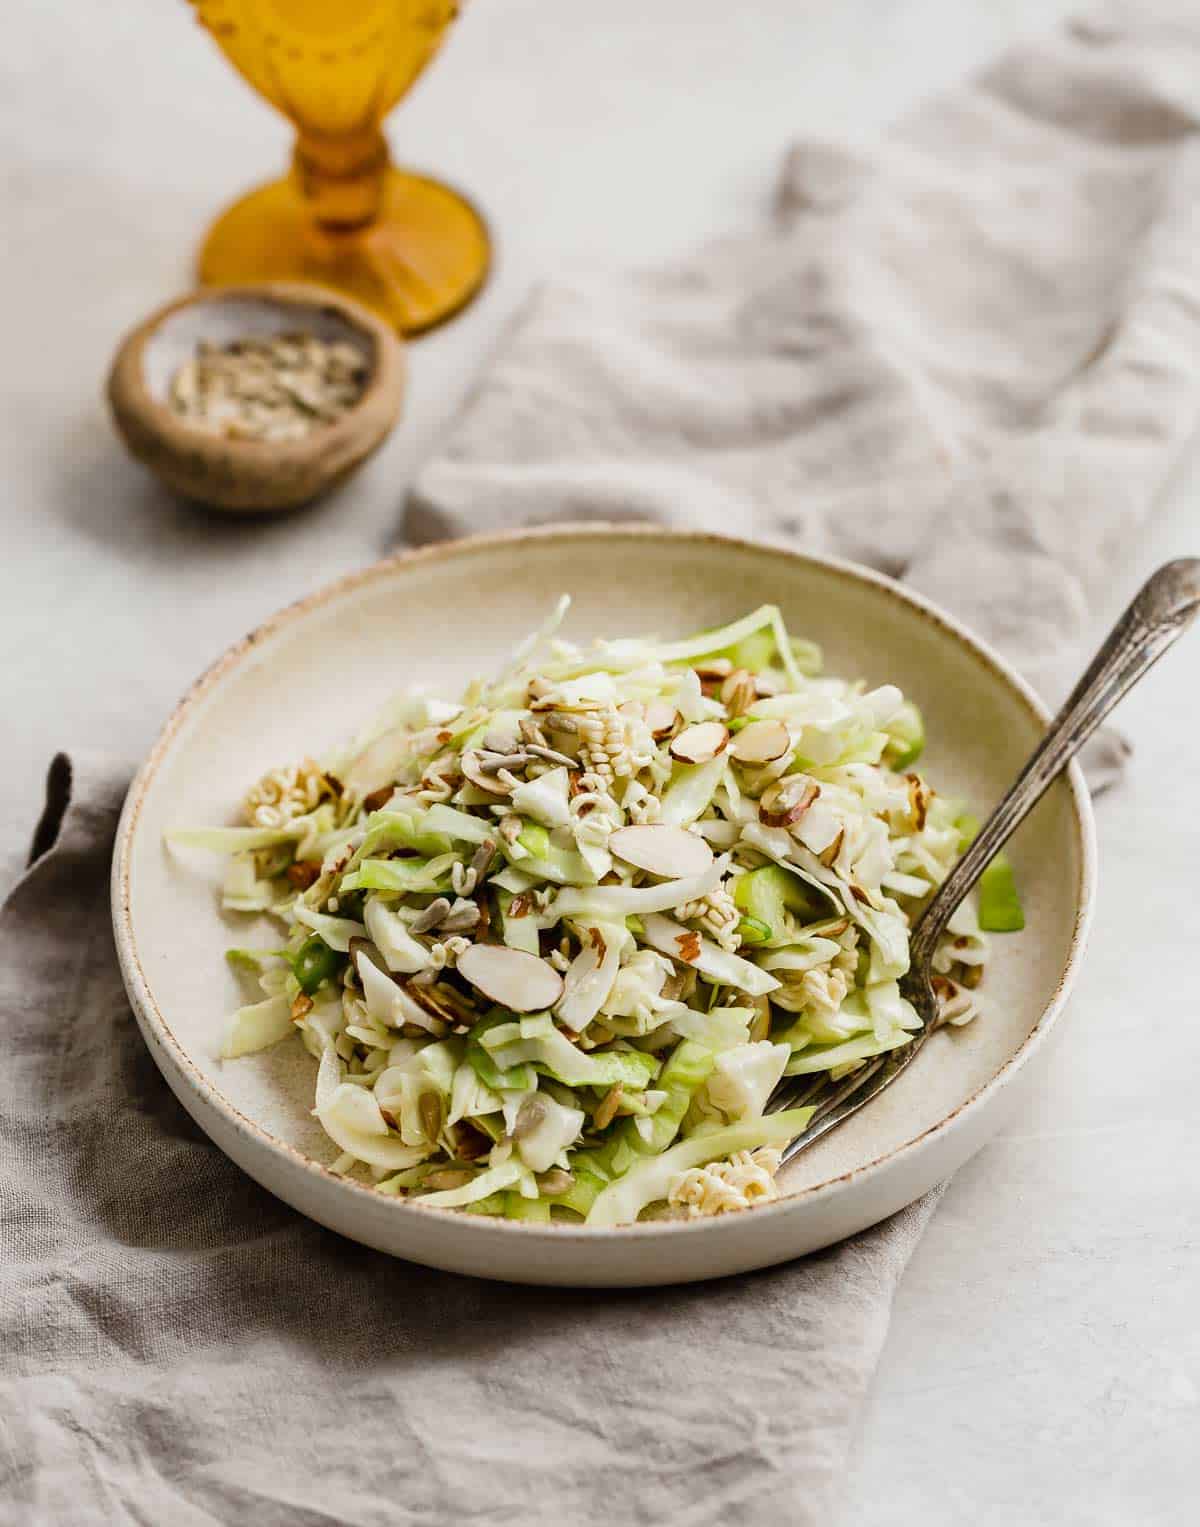 Crunchy Cabbage Salad recipe on a tan plate.